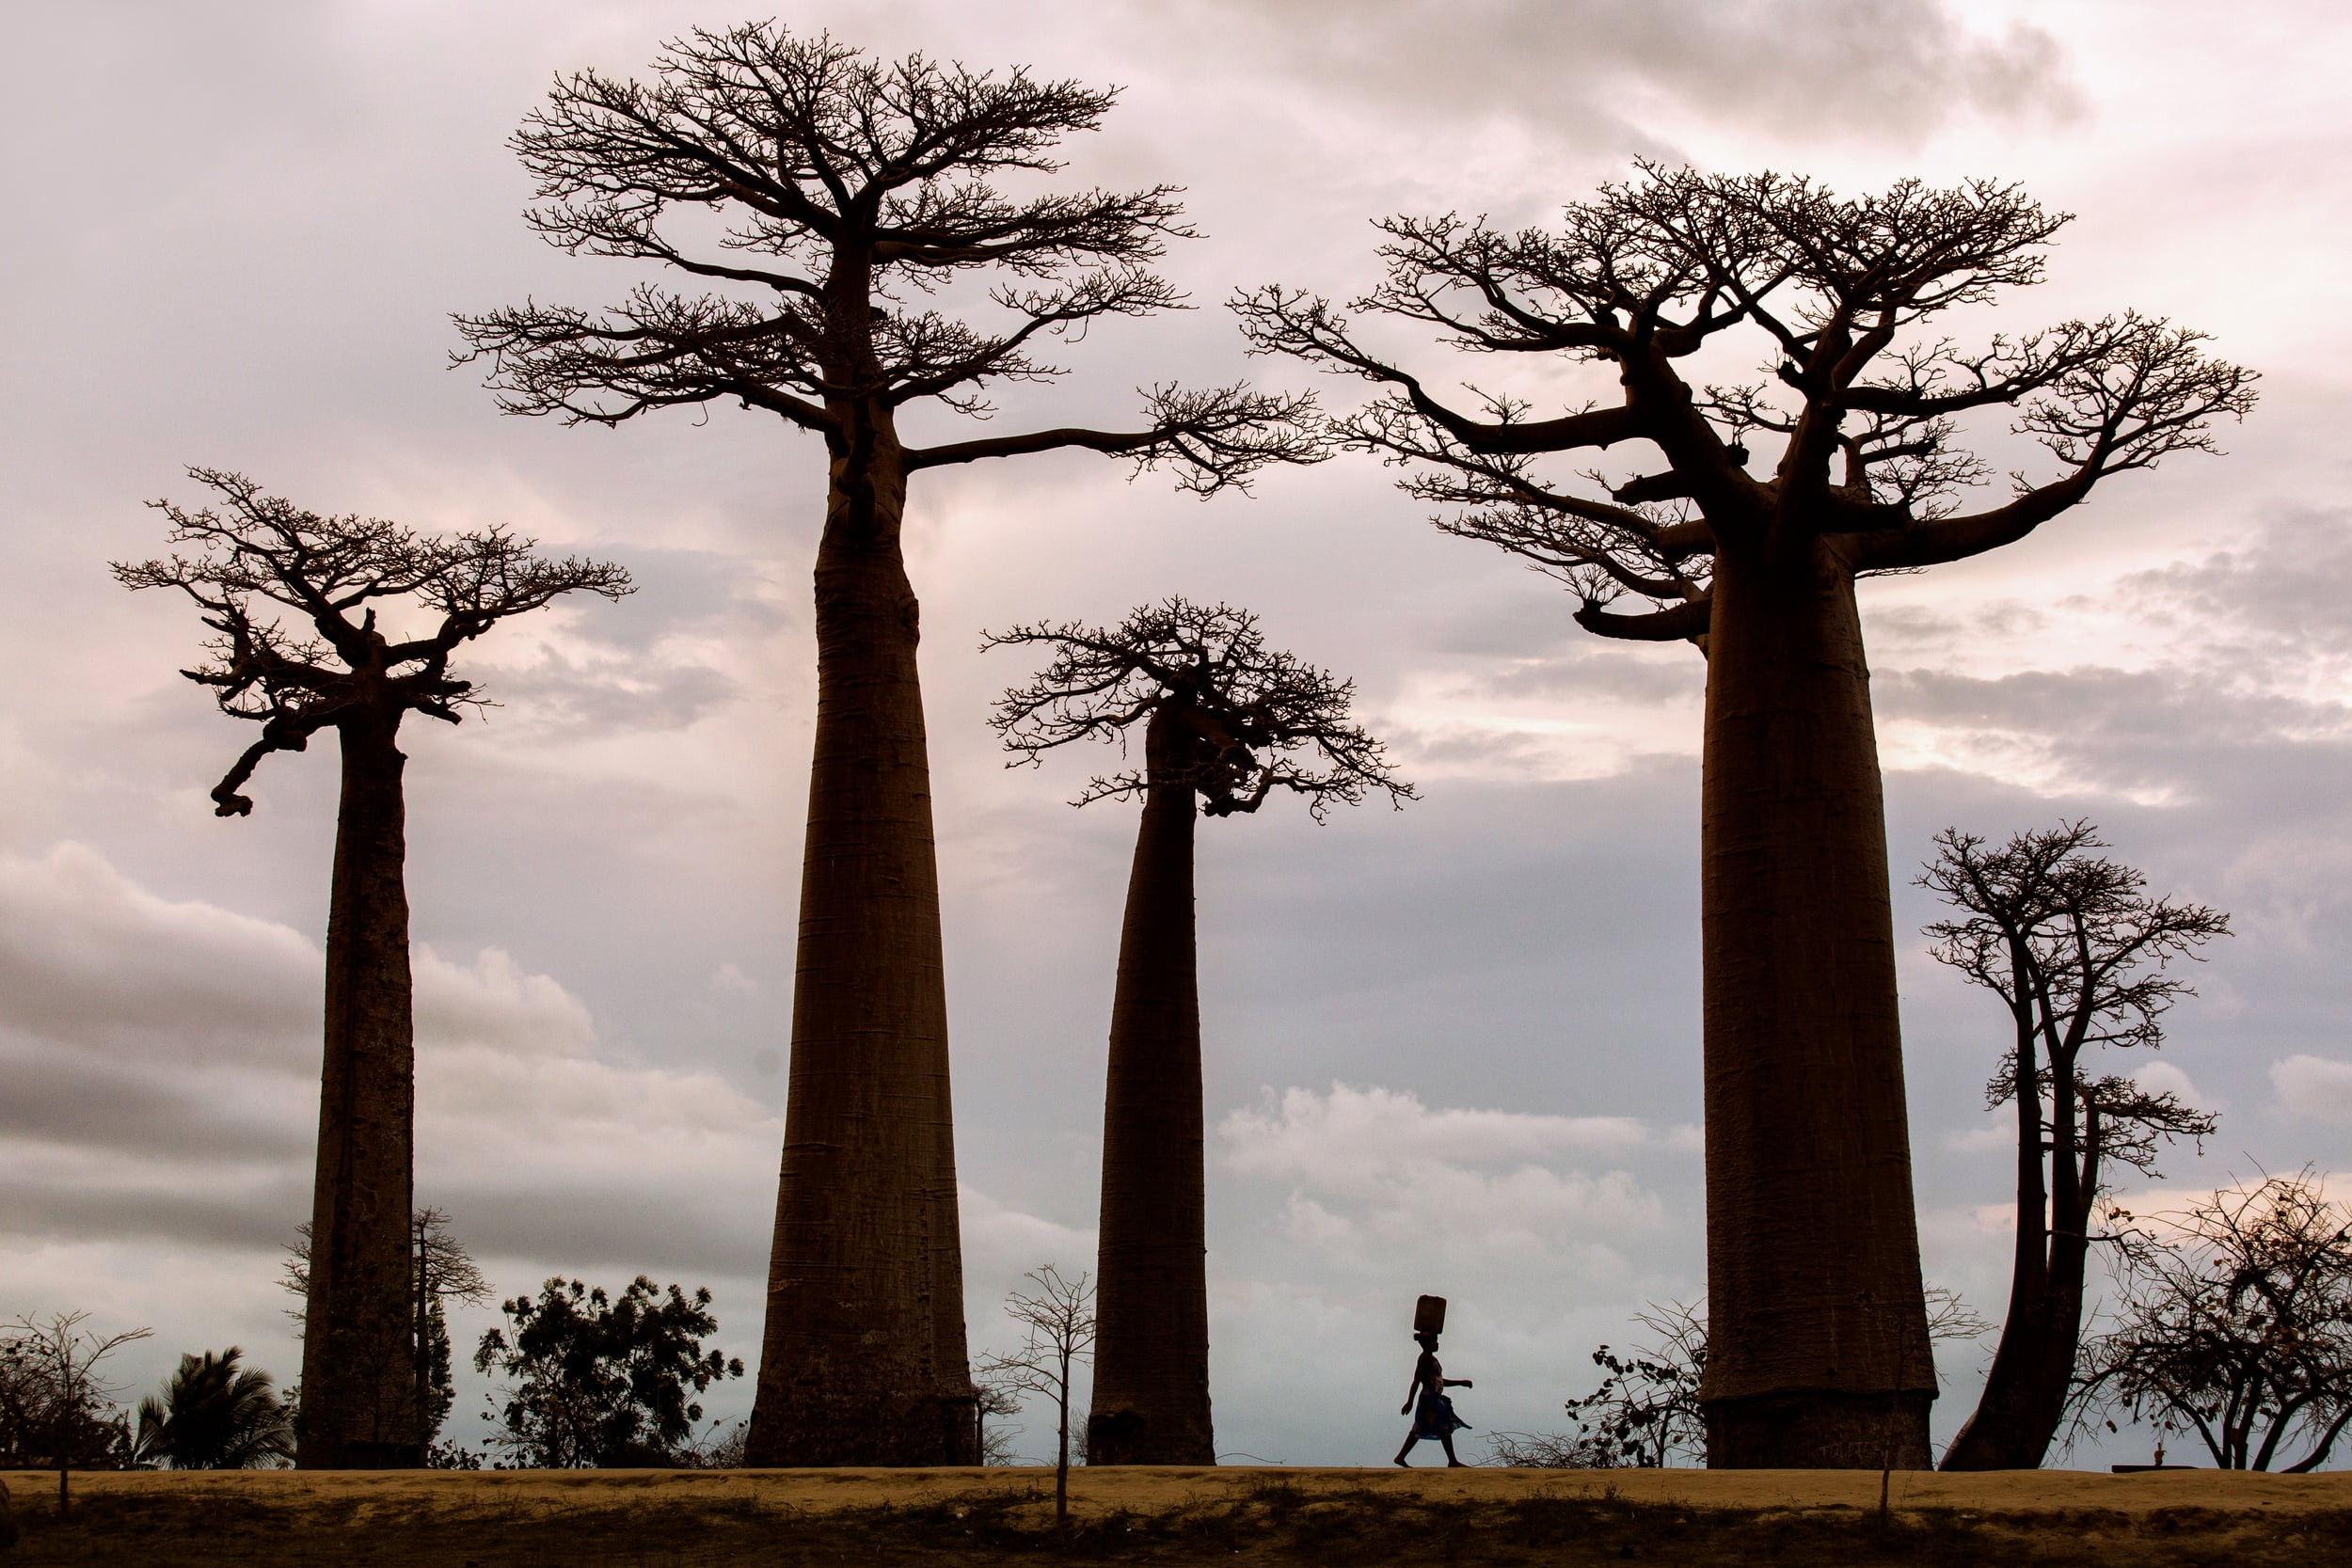 Africa, trees, plants, baobab trees, baobabs, nature